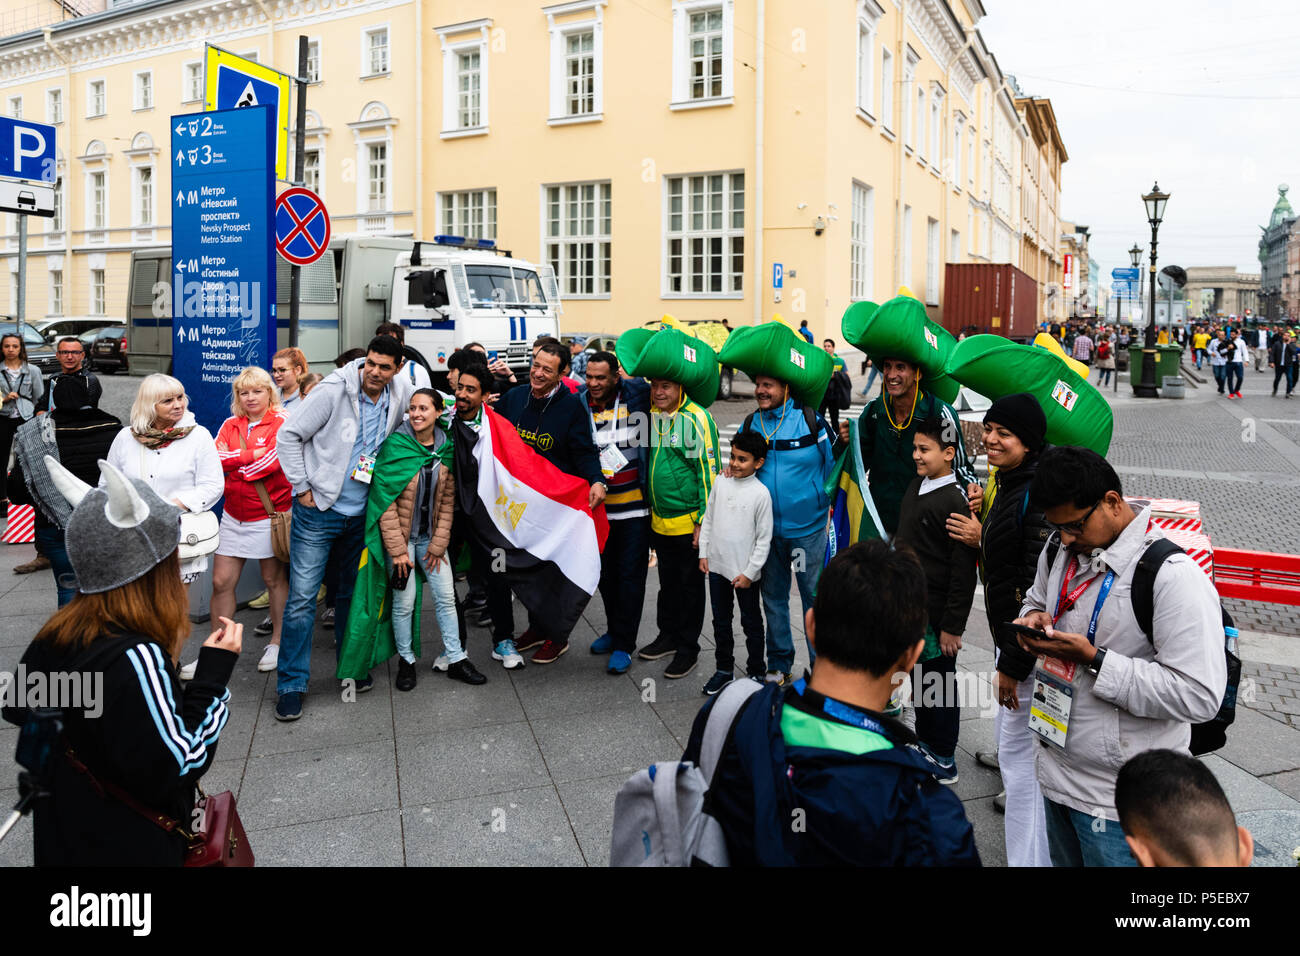 Fans gather in Russia during the 2018 FIFA World Cup Stock Photo